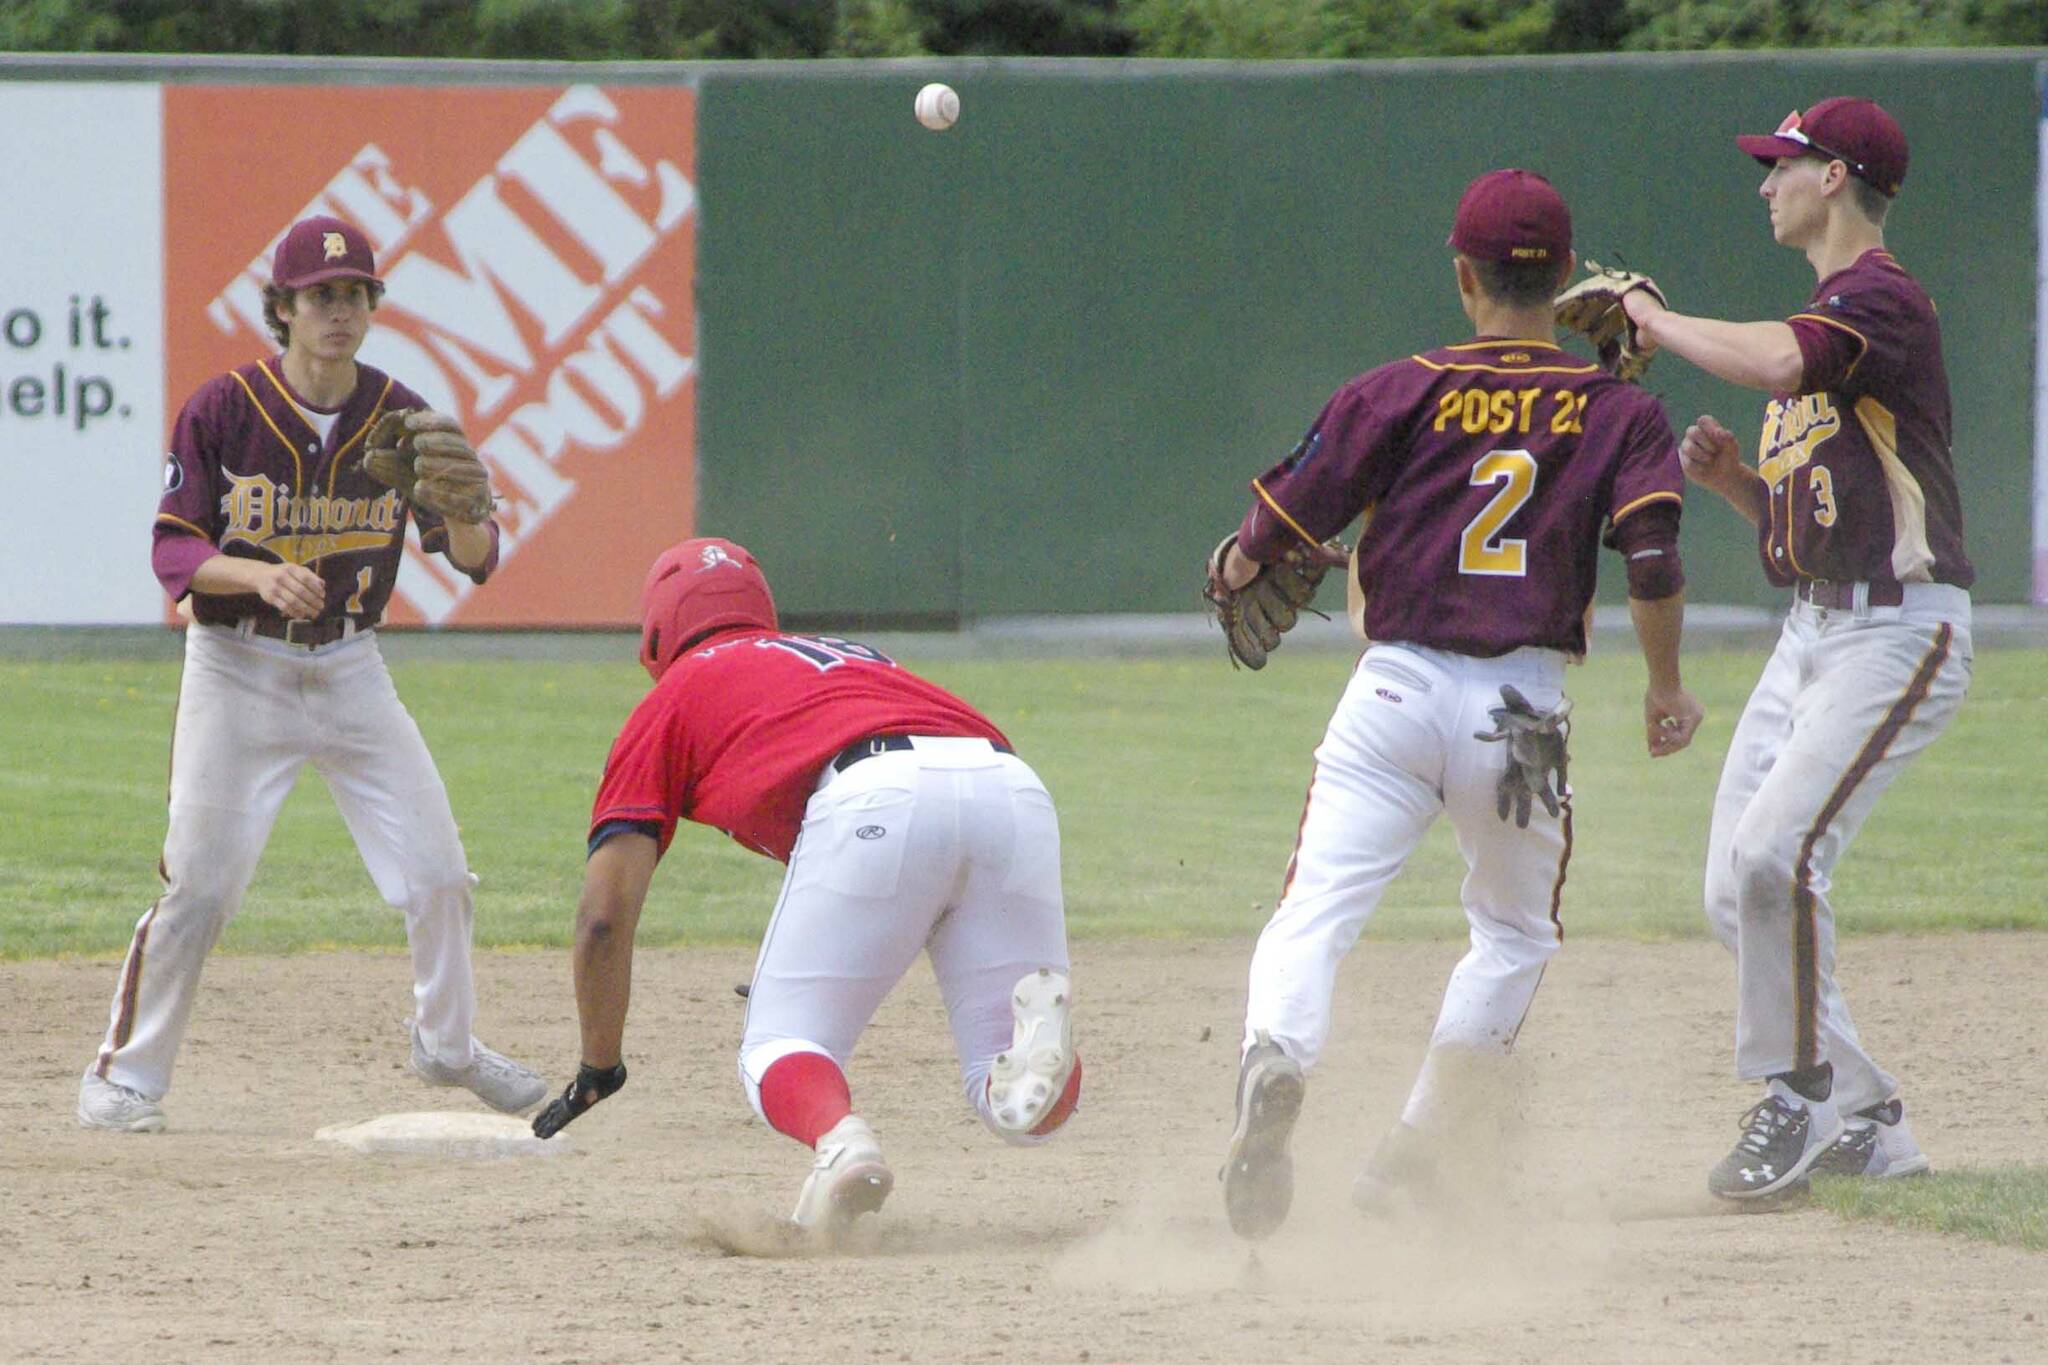 Atticus Gibson of the Post 20 Twins slides under the tag of Dimond's Shane Stephan to get out of a rundown Saturday, June 11, 2022, at Coral Seymour Memorial Park in Kenai, Alaska. (Photo by Jeff Helminiak/Peninsula Clarion)